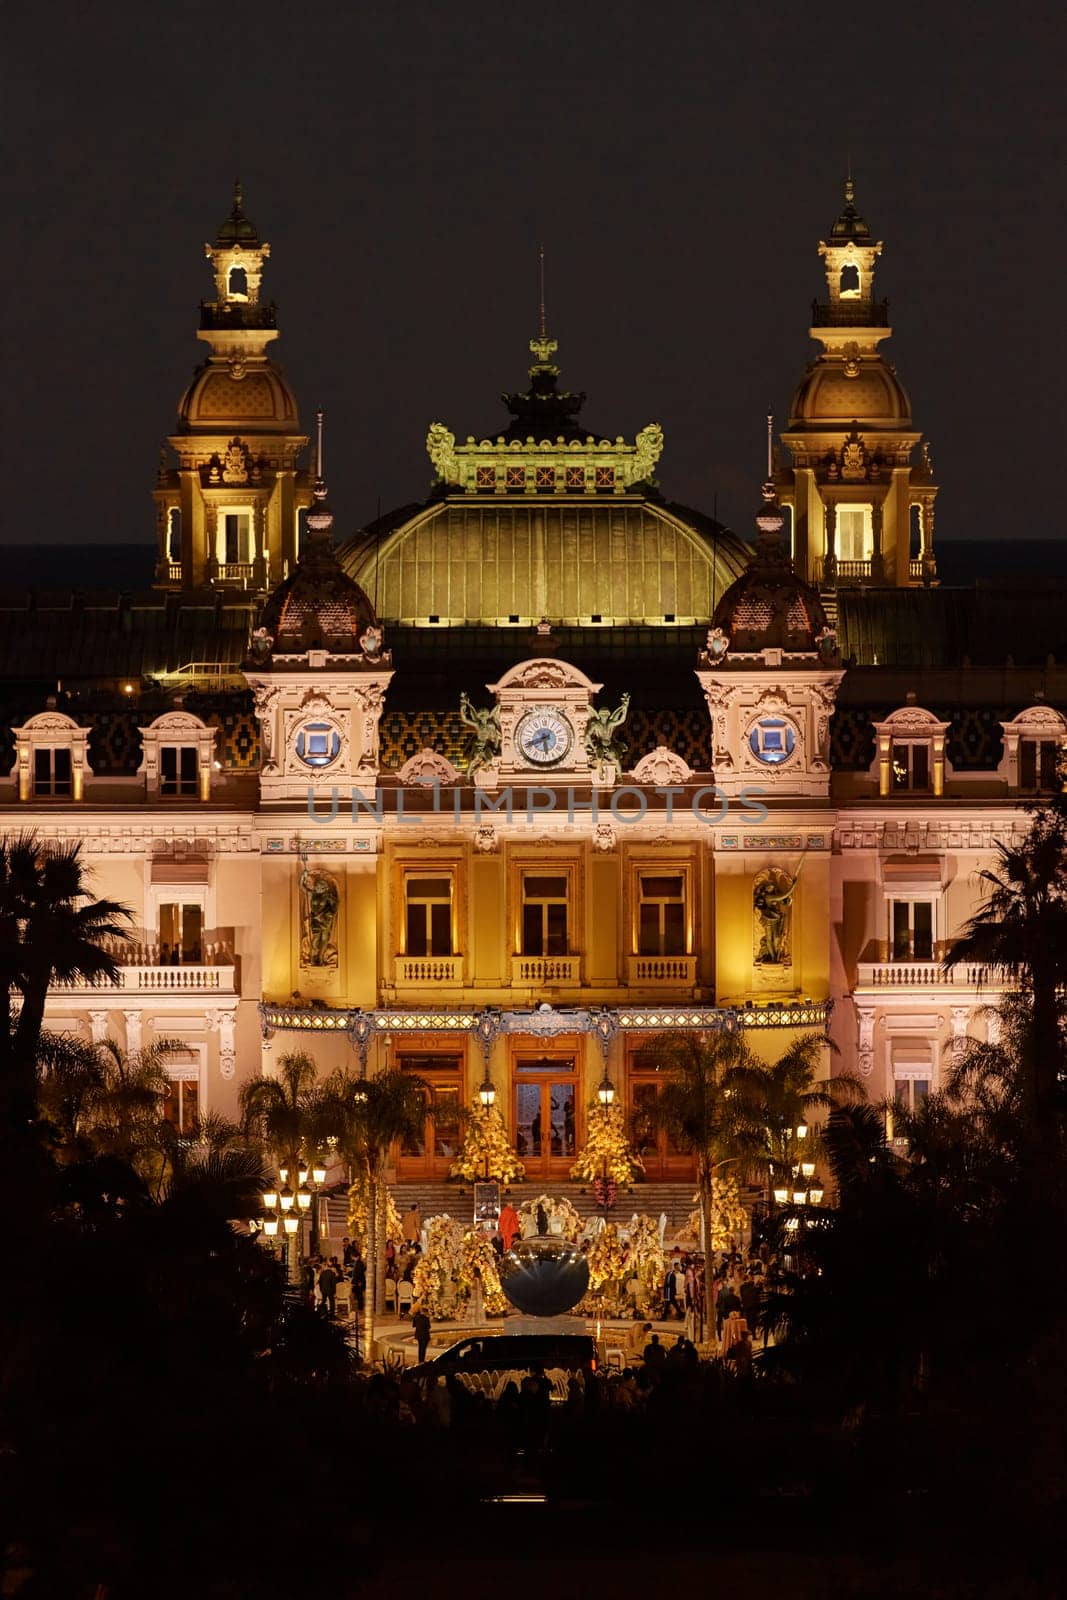 Monaco, Monte-Carlo, 12 November 2022: The famous Casino Monte-Carlo is at night, attraction night illumination, luxury cars, players, tourists, splashes of fountain by vladimirdrozdin